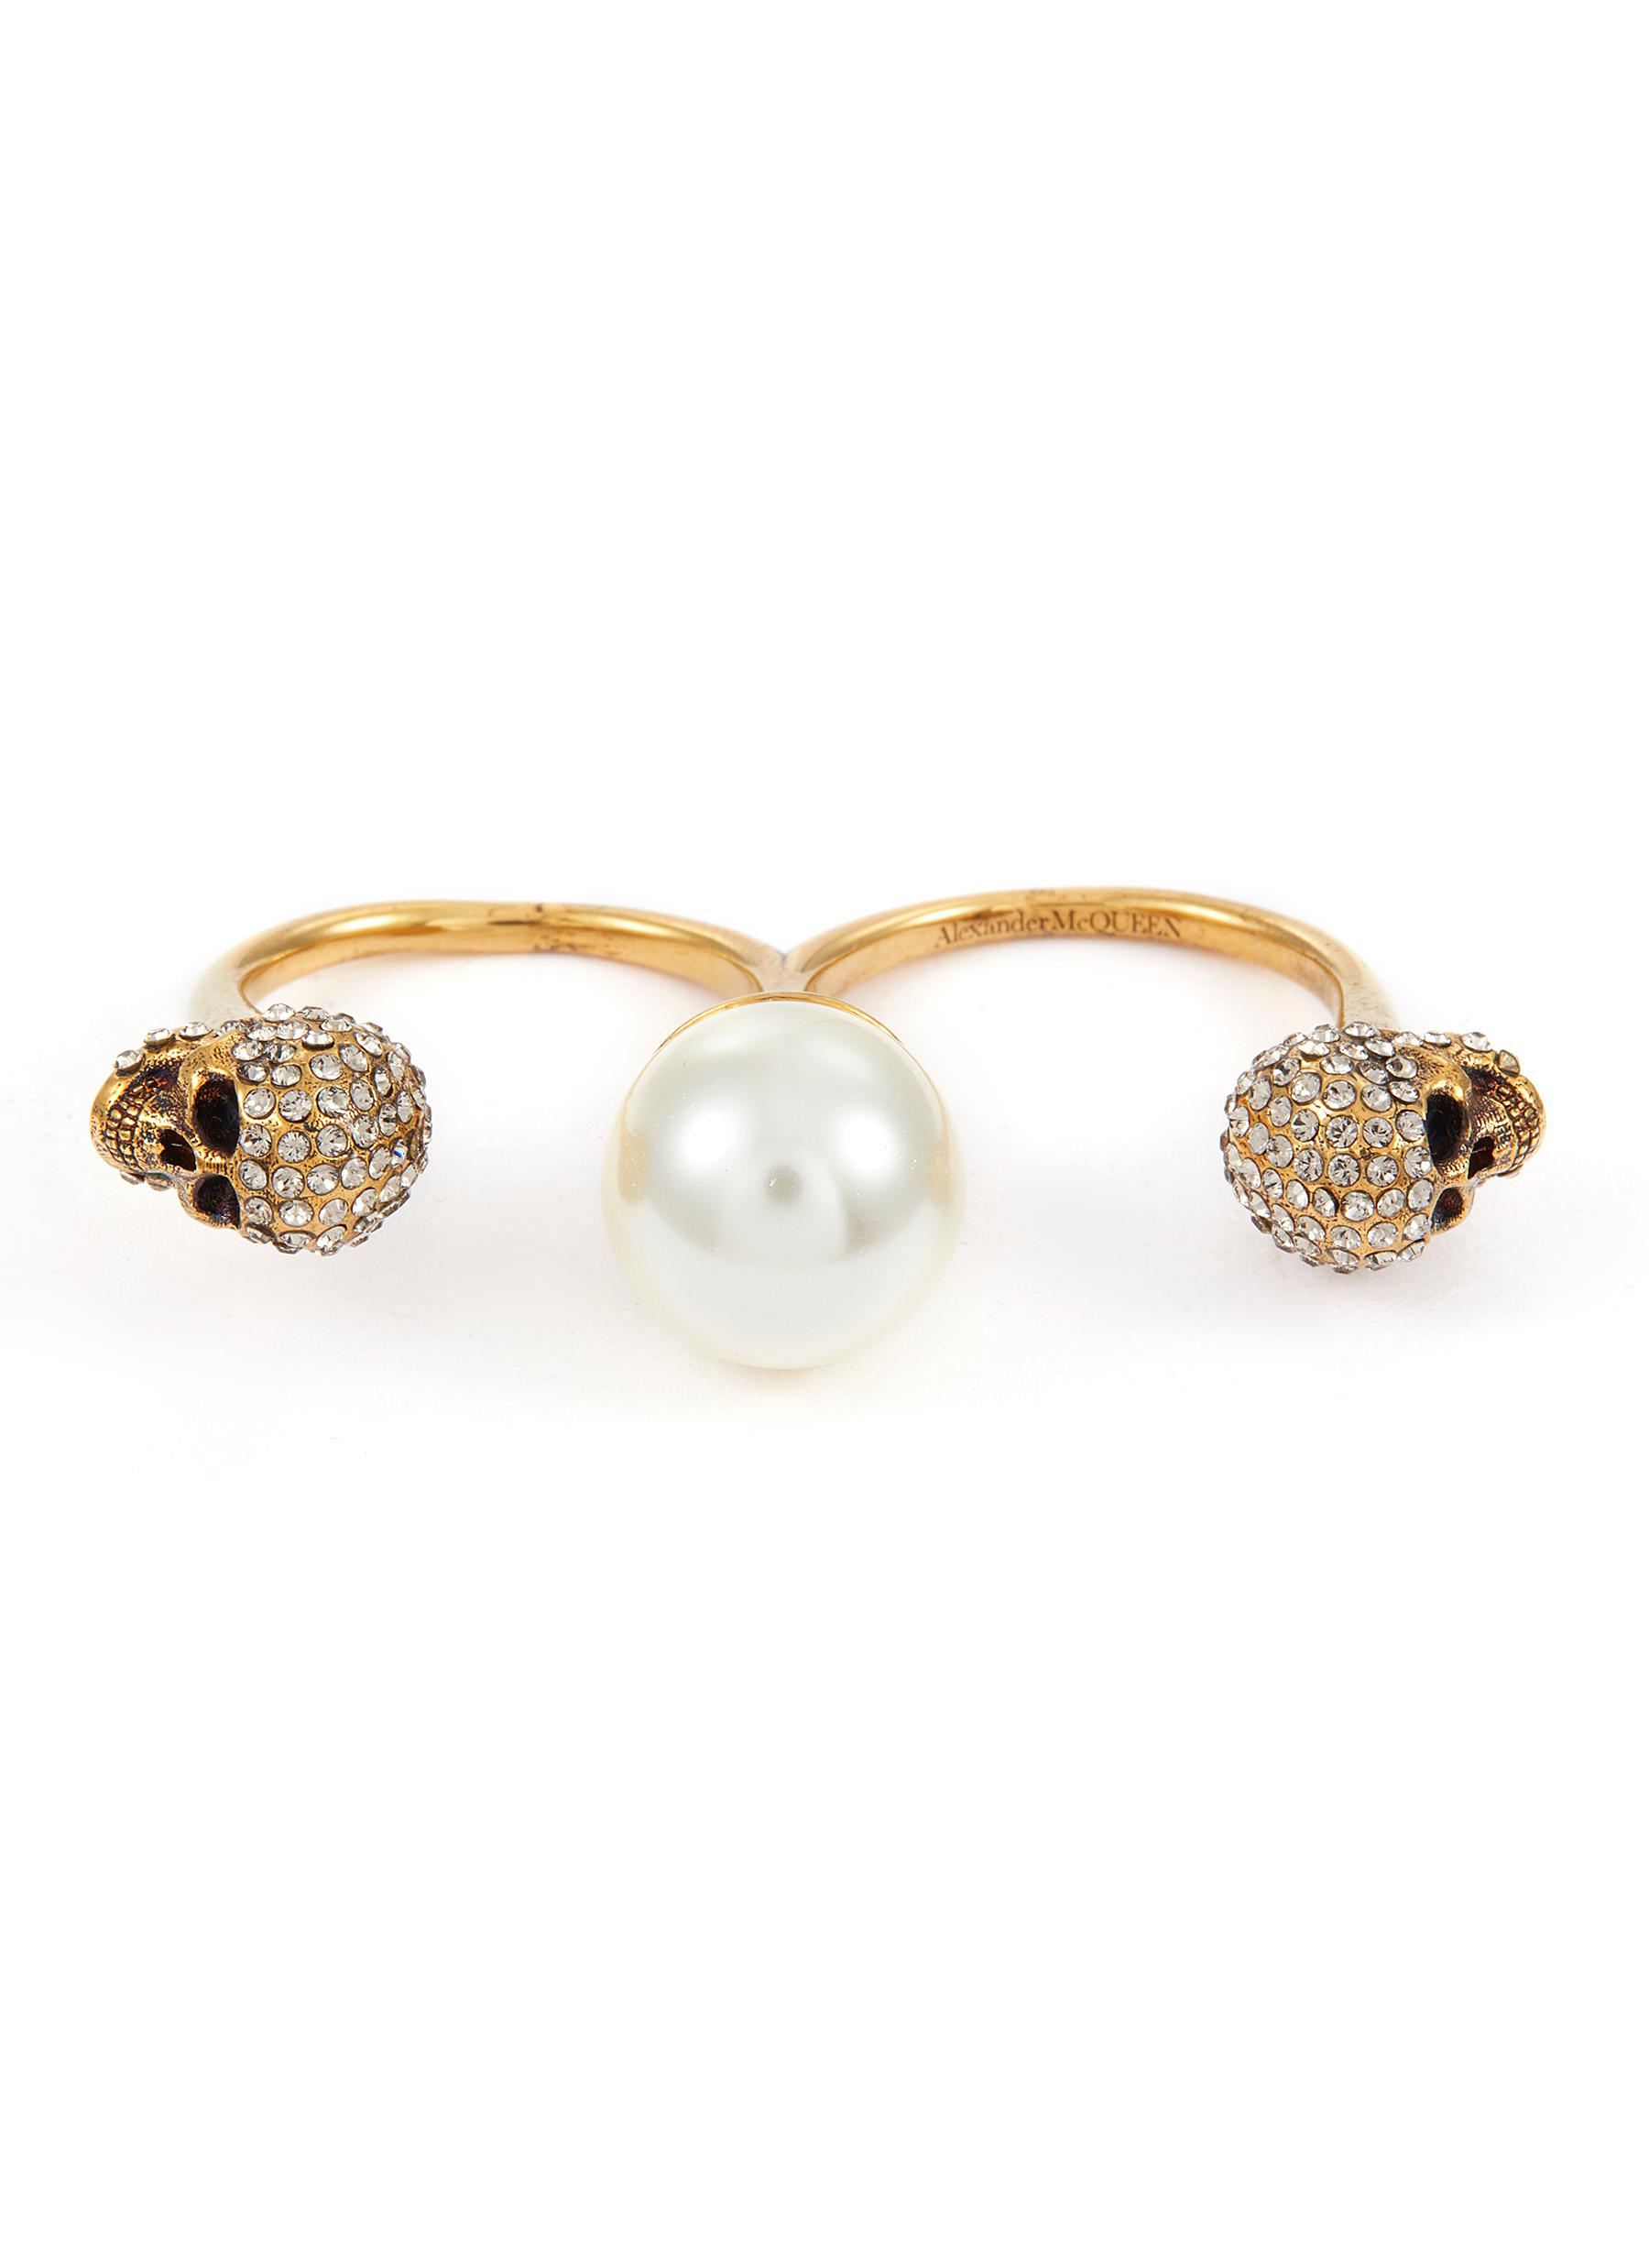 ALEXANDER MCQUEEN CRYSTAL EMBELLISHED SKULL FAUX PEARL RING